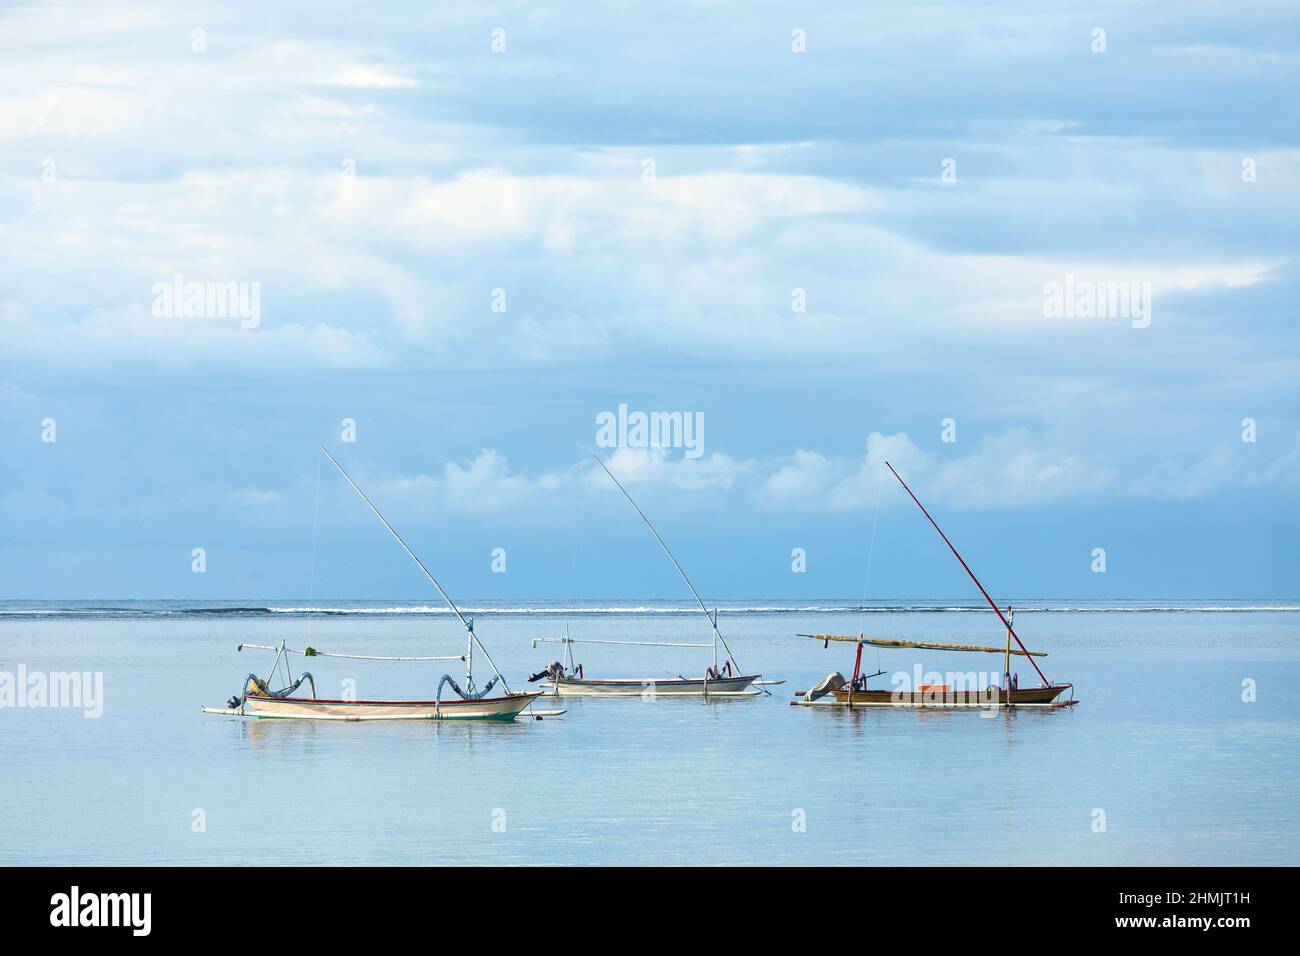 Traditional fishing boats called jukung on the white sand beach. Nusa dua beach, Bali island, Indonesia. High waves with foam spread on the coast. Ama Stock Photo